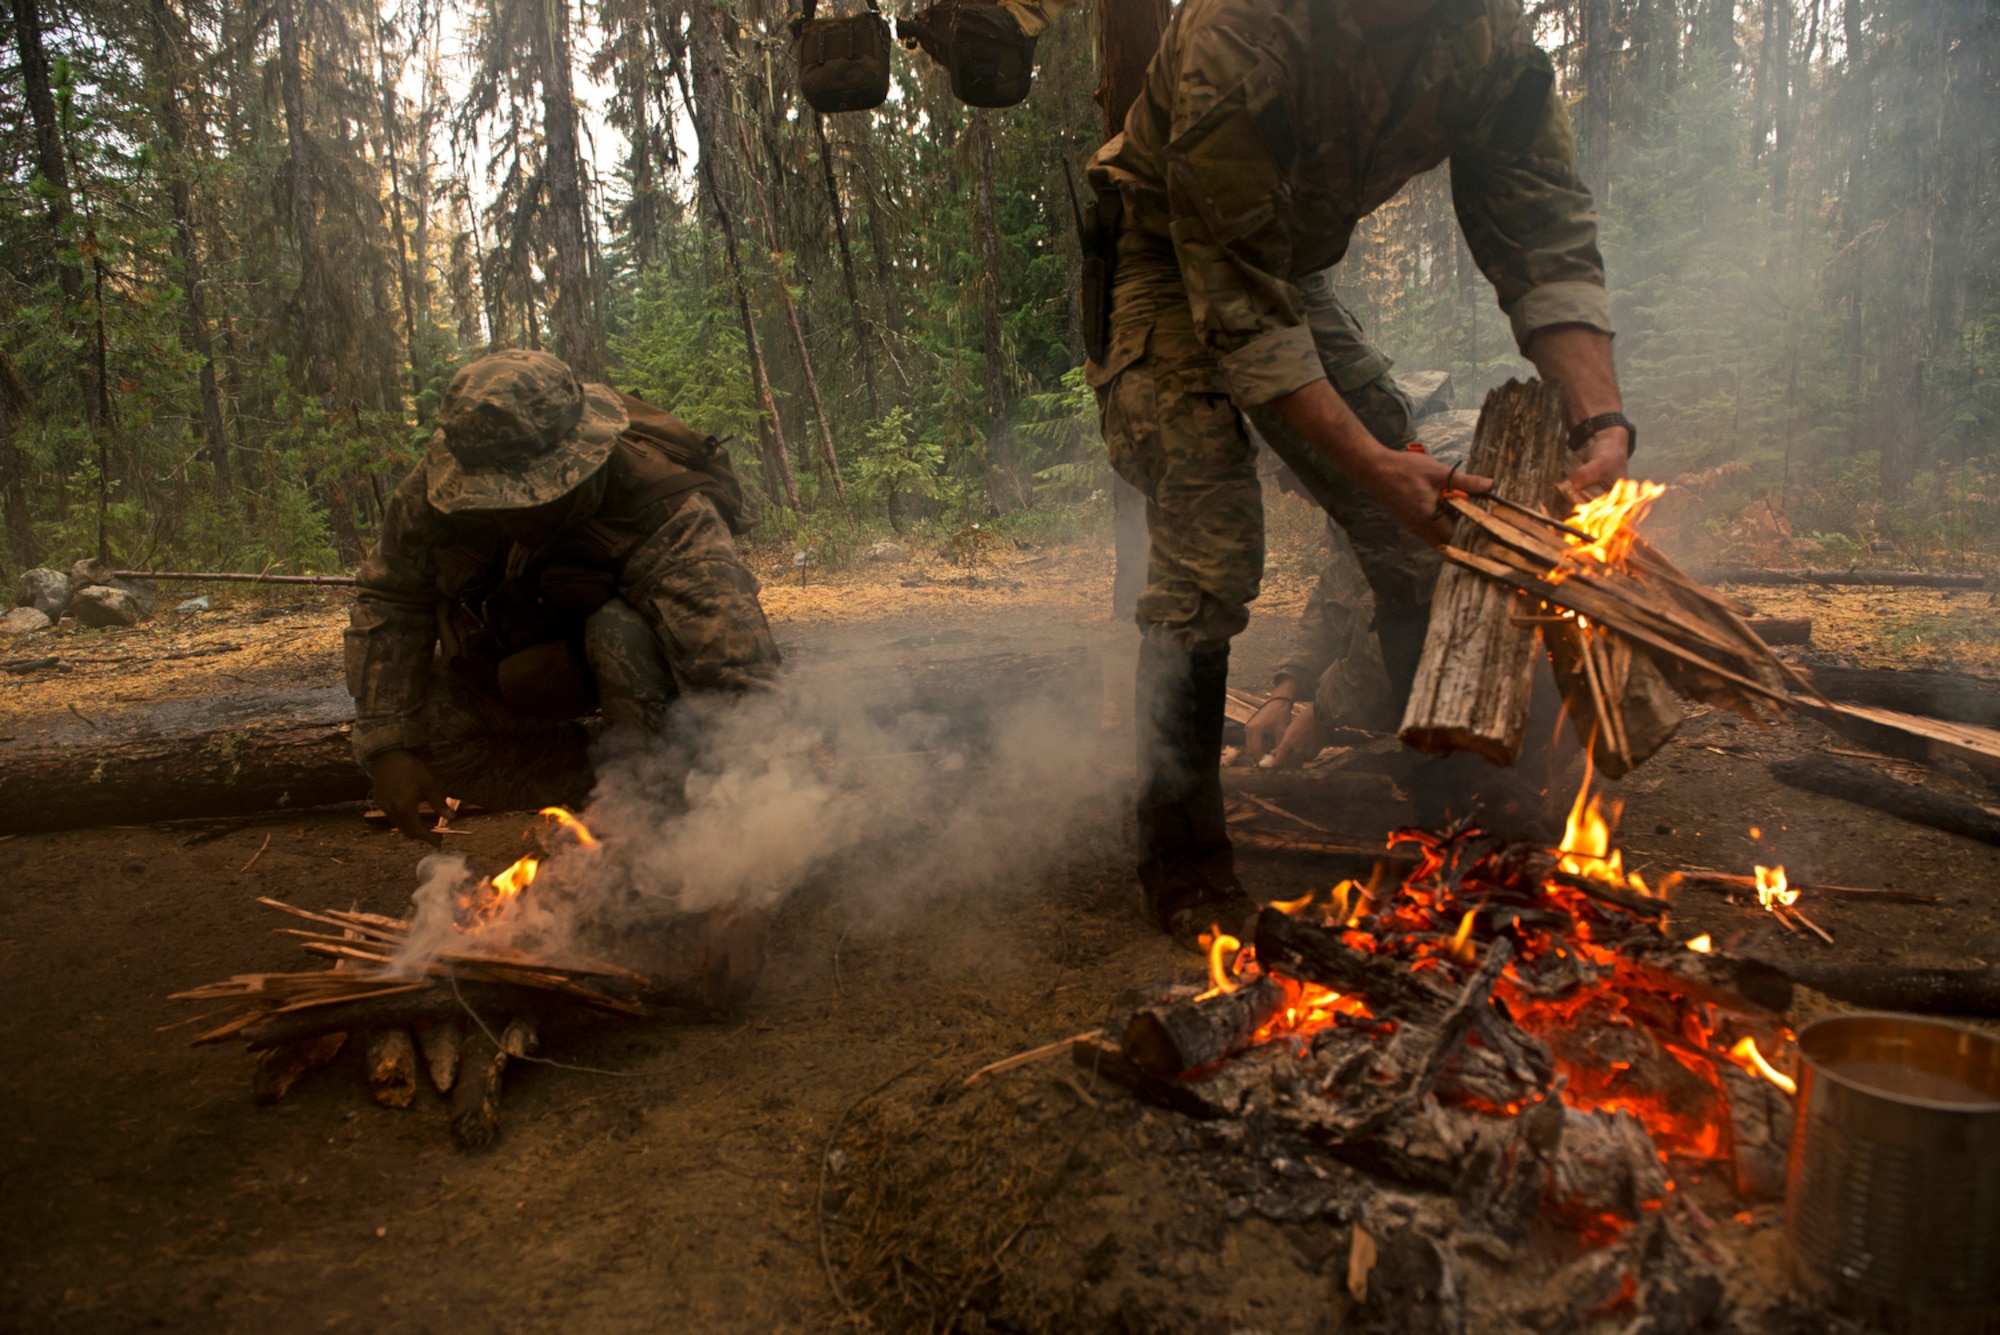 Survival, evasion, resistance and escape students build fires while learning to create improvised shelters in the mountains of the Colville National Forest SERE training site. Students will be taught the means to survive and then will be released into the woods to evade capture and use their newly learned skills. (U.S. Air Force photo/Tech. Sgt. Bennie J. Davis III)